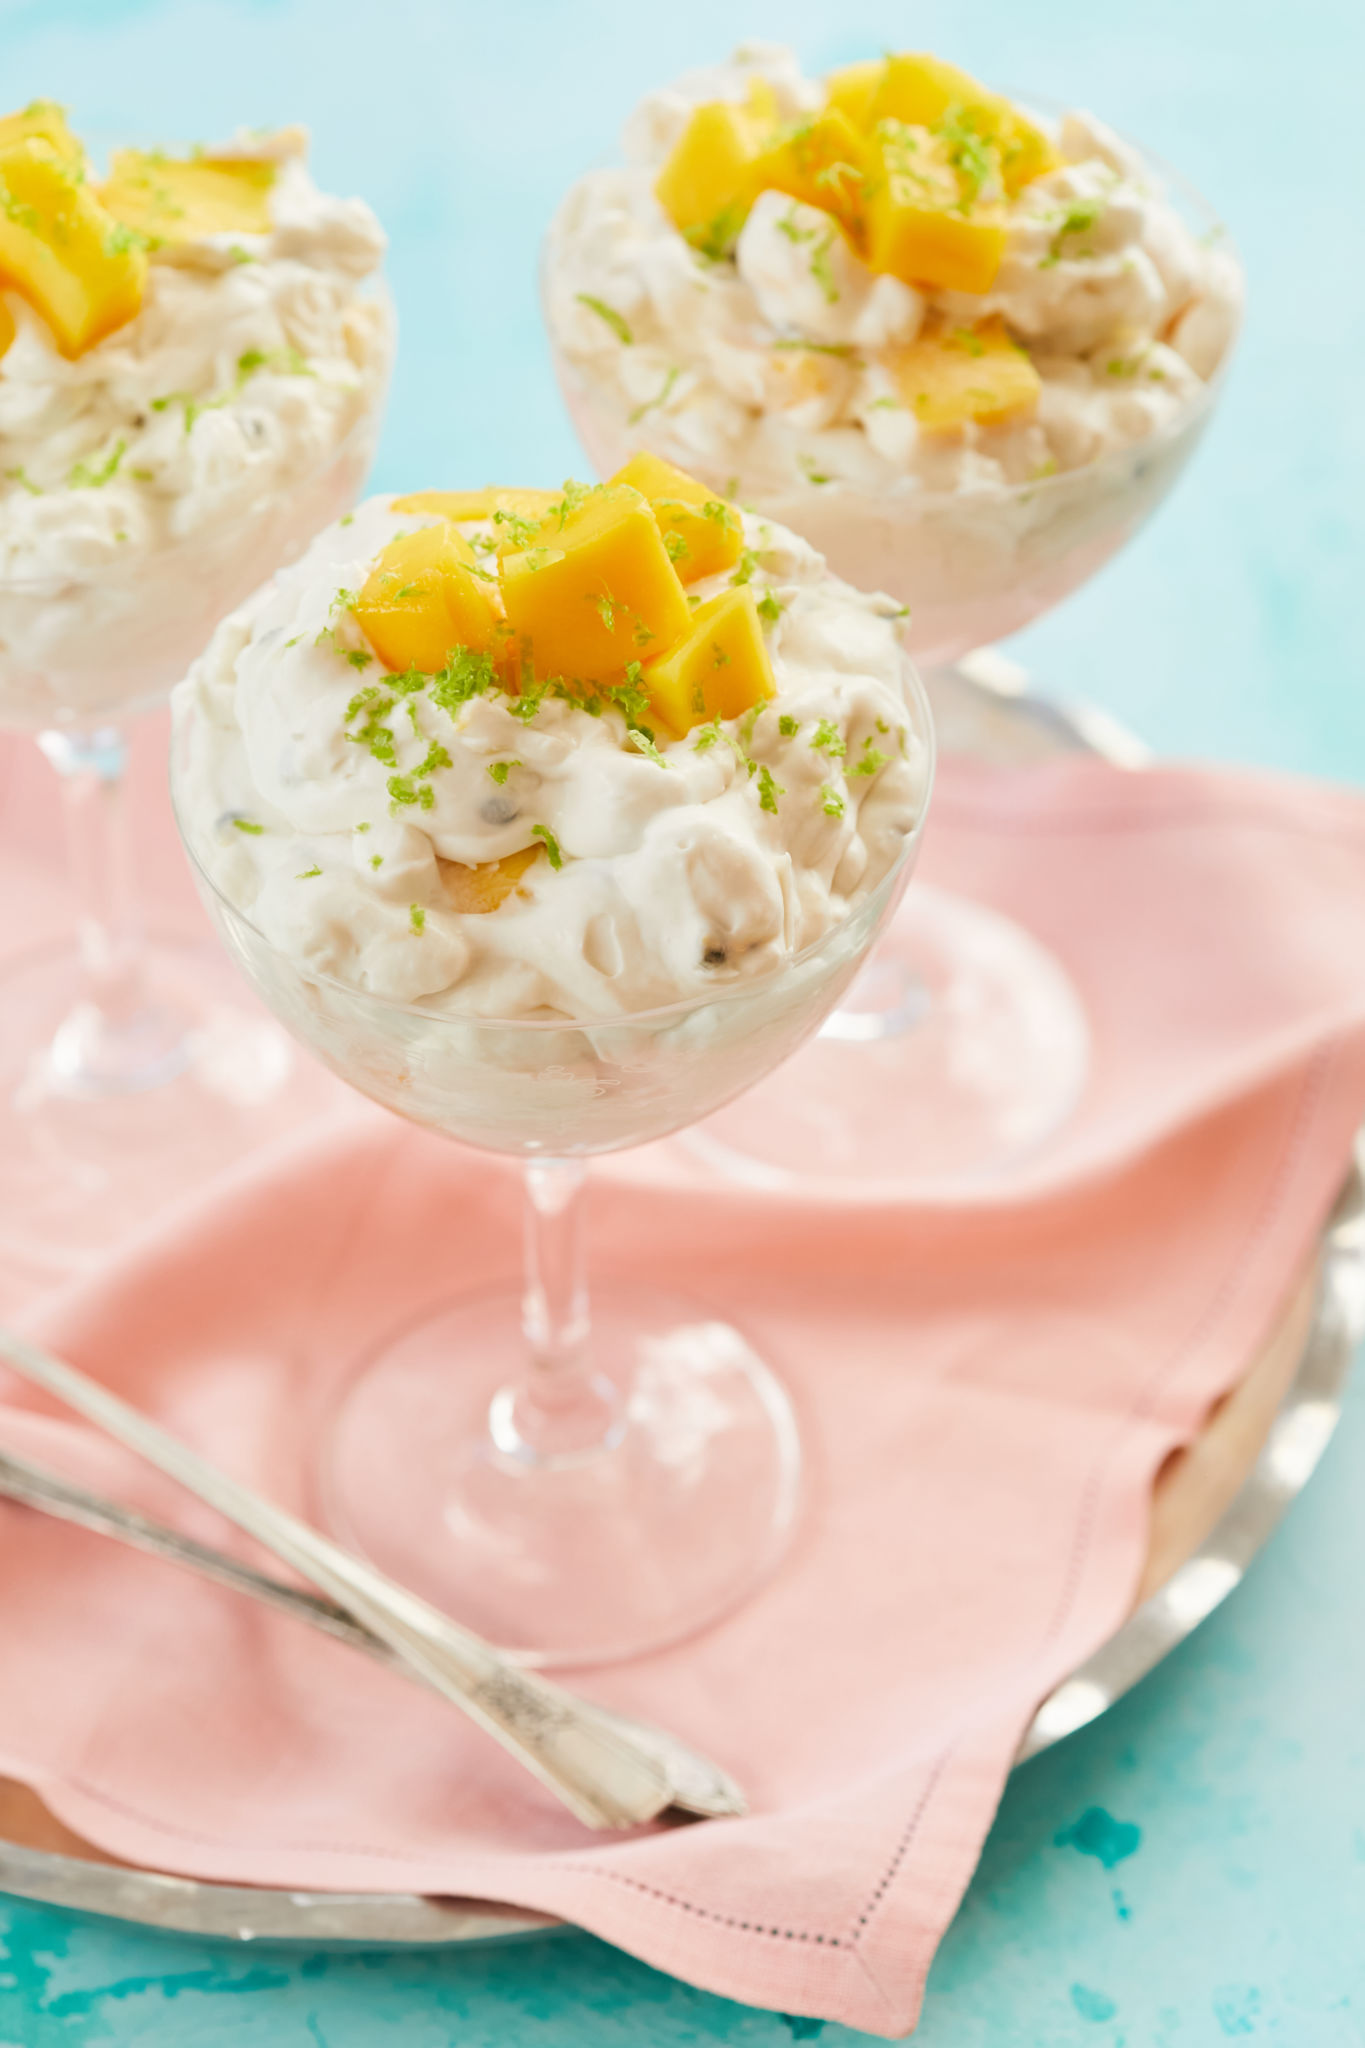 A dish of tropical Eton mess in a wine glass.